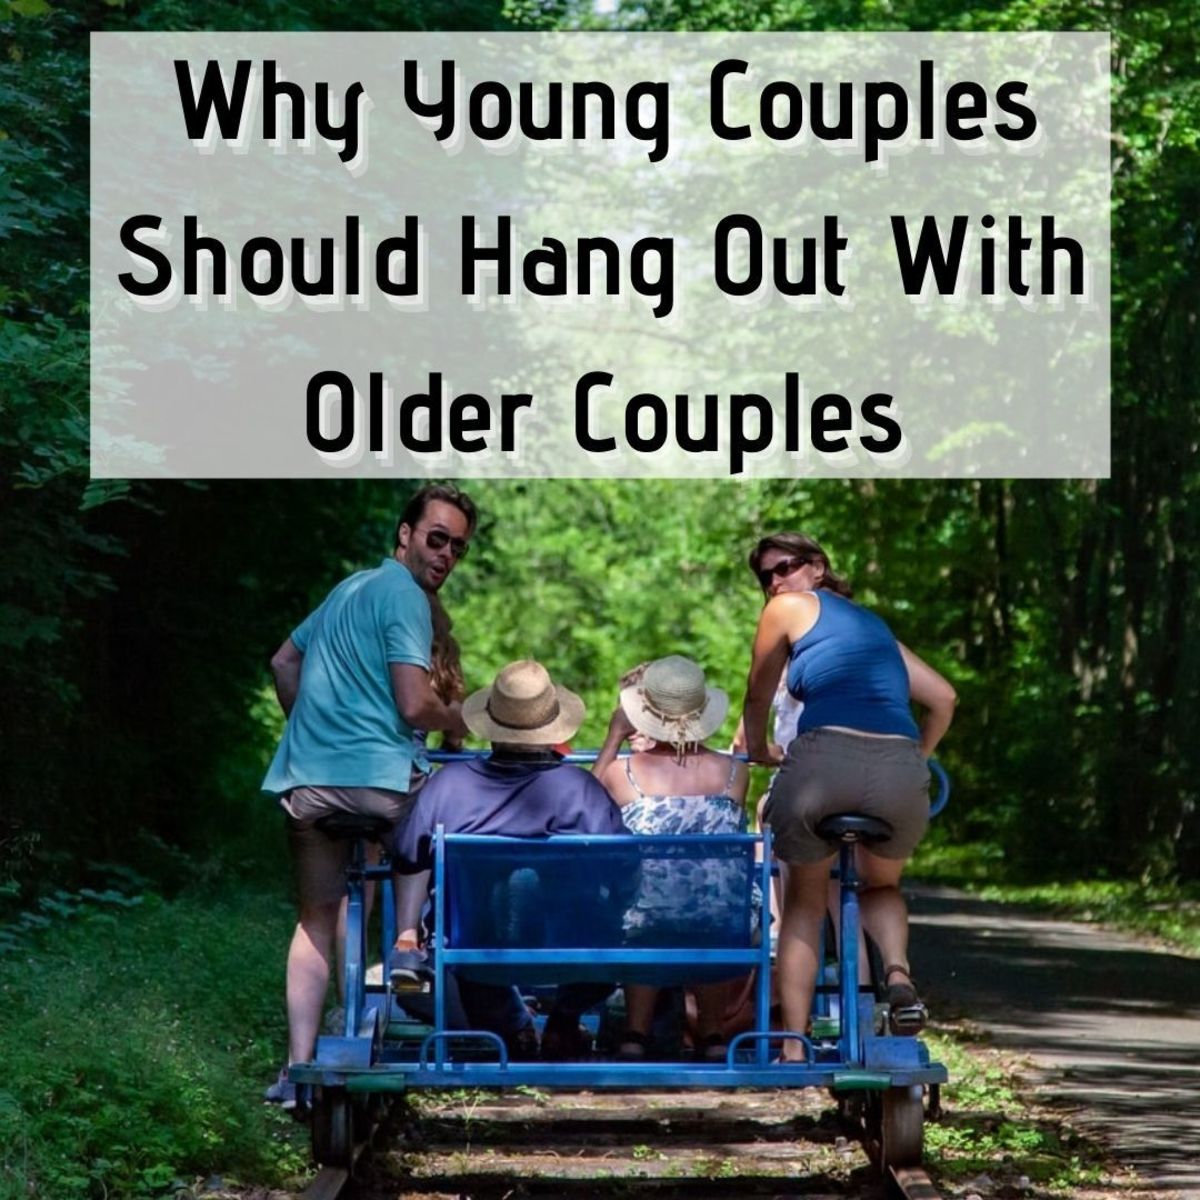 Young couples can learn valuable lessons from their elder counterparts.